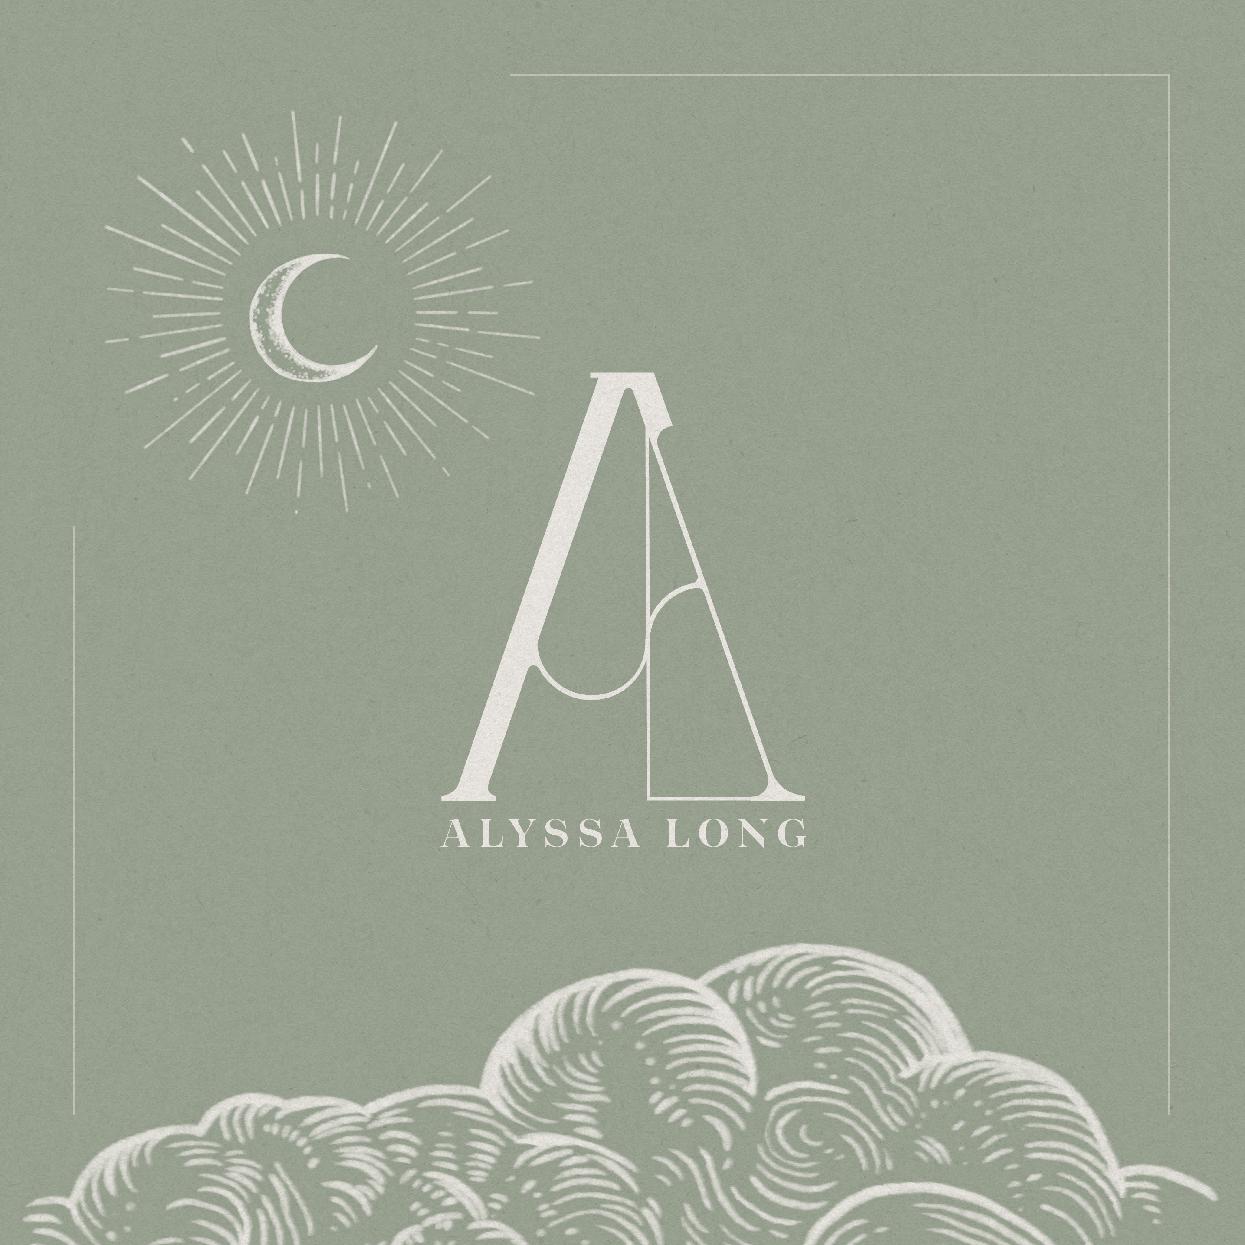 Calming sage green front cover with rolling white clouds and an illustrative letter A bedecked by a crescent moon